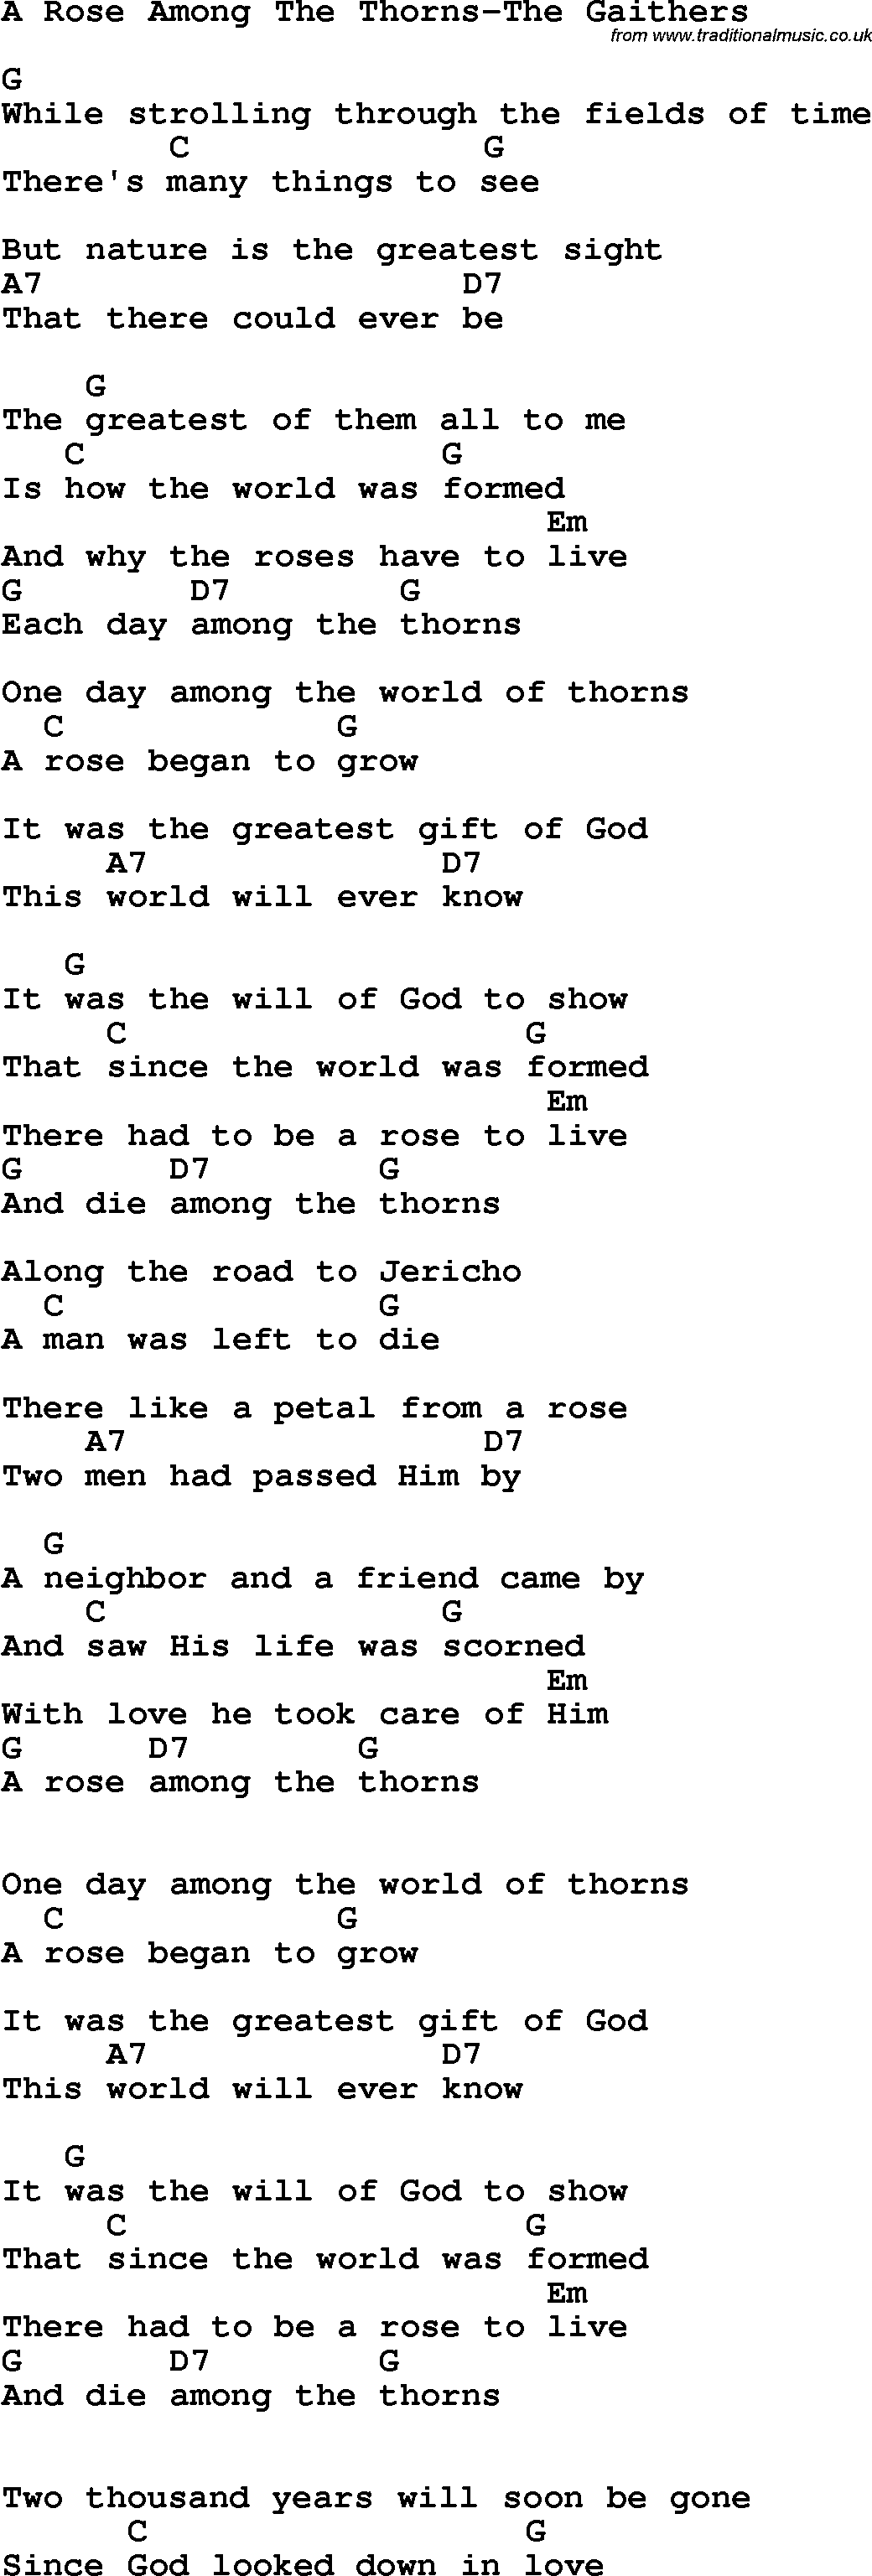 Country, Southern and Bluegrass Gospel Song A Rose Among The Thorns-The Gaithers lyrics and chords